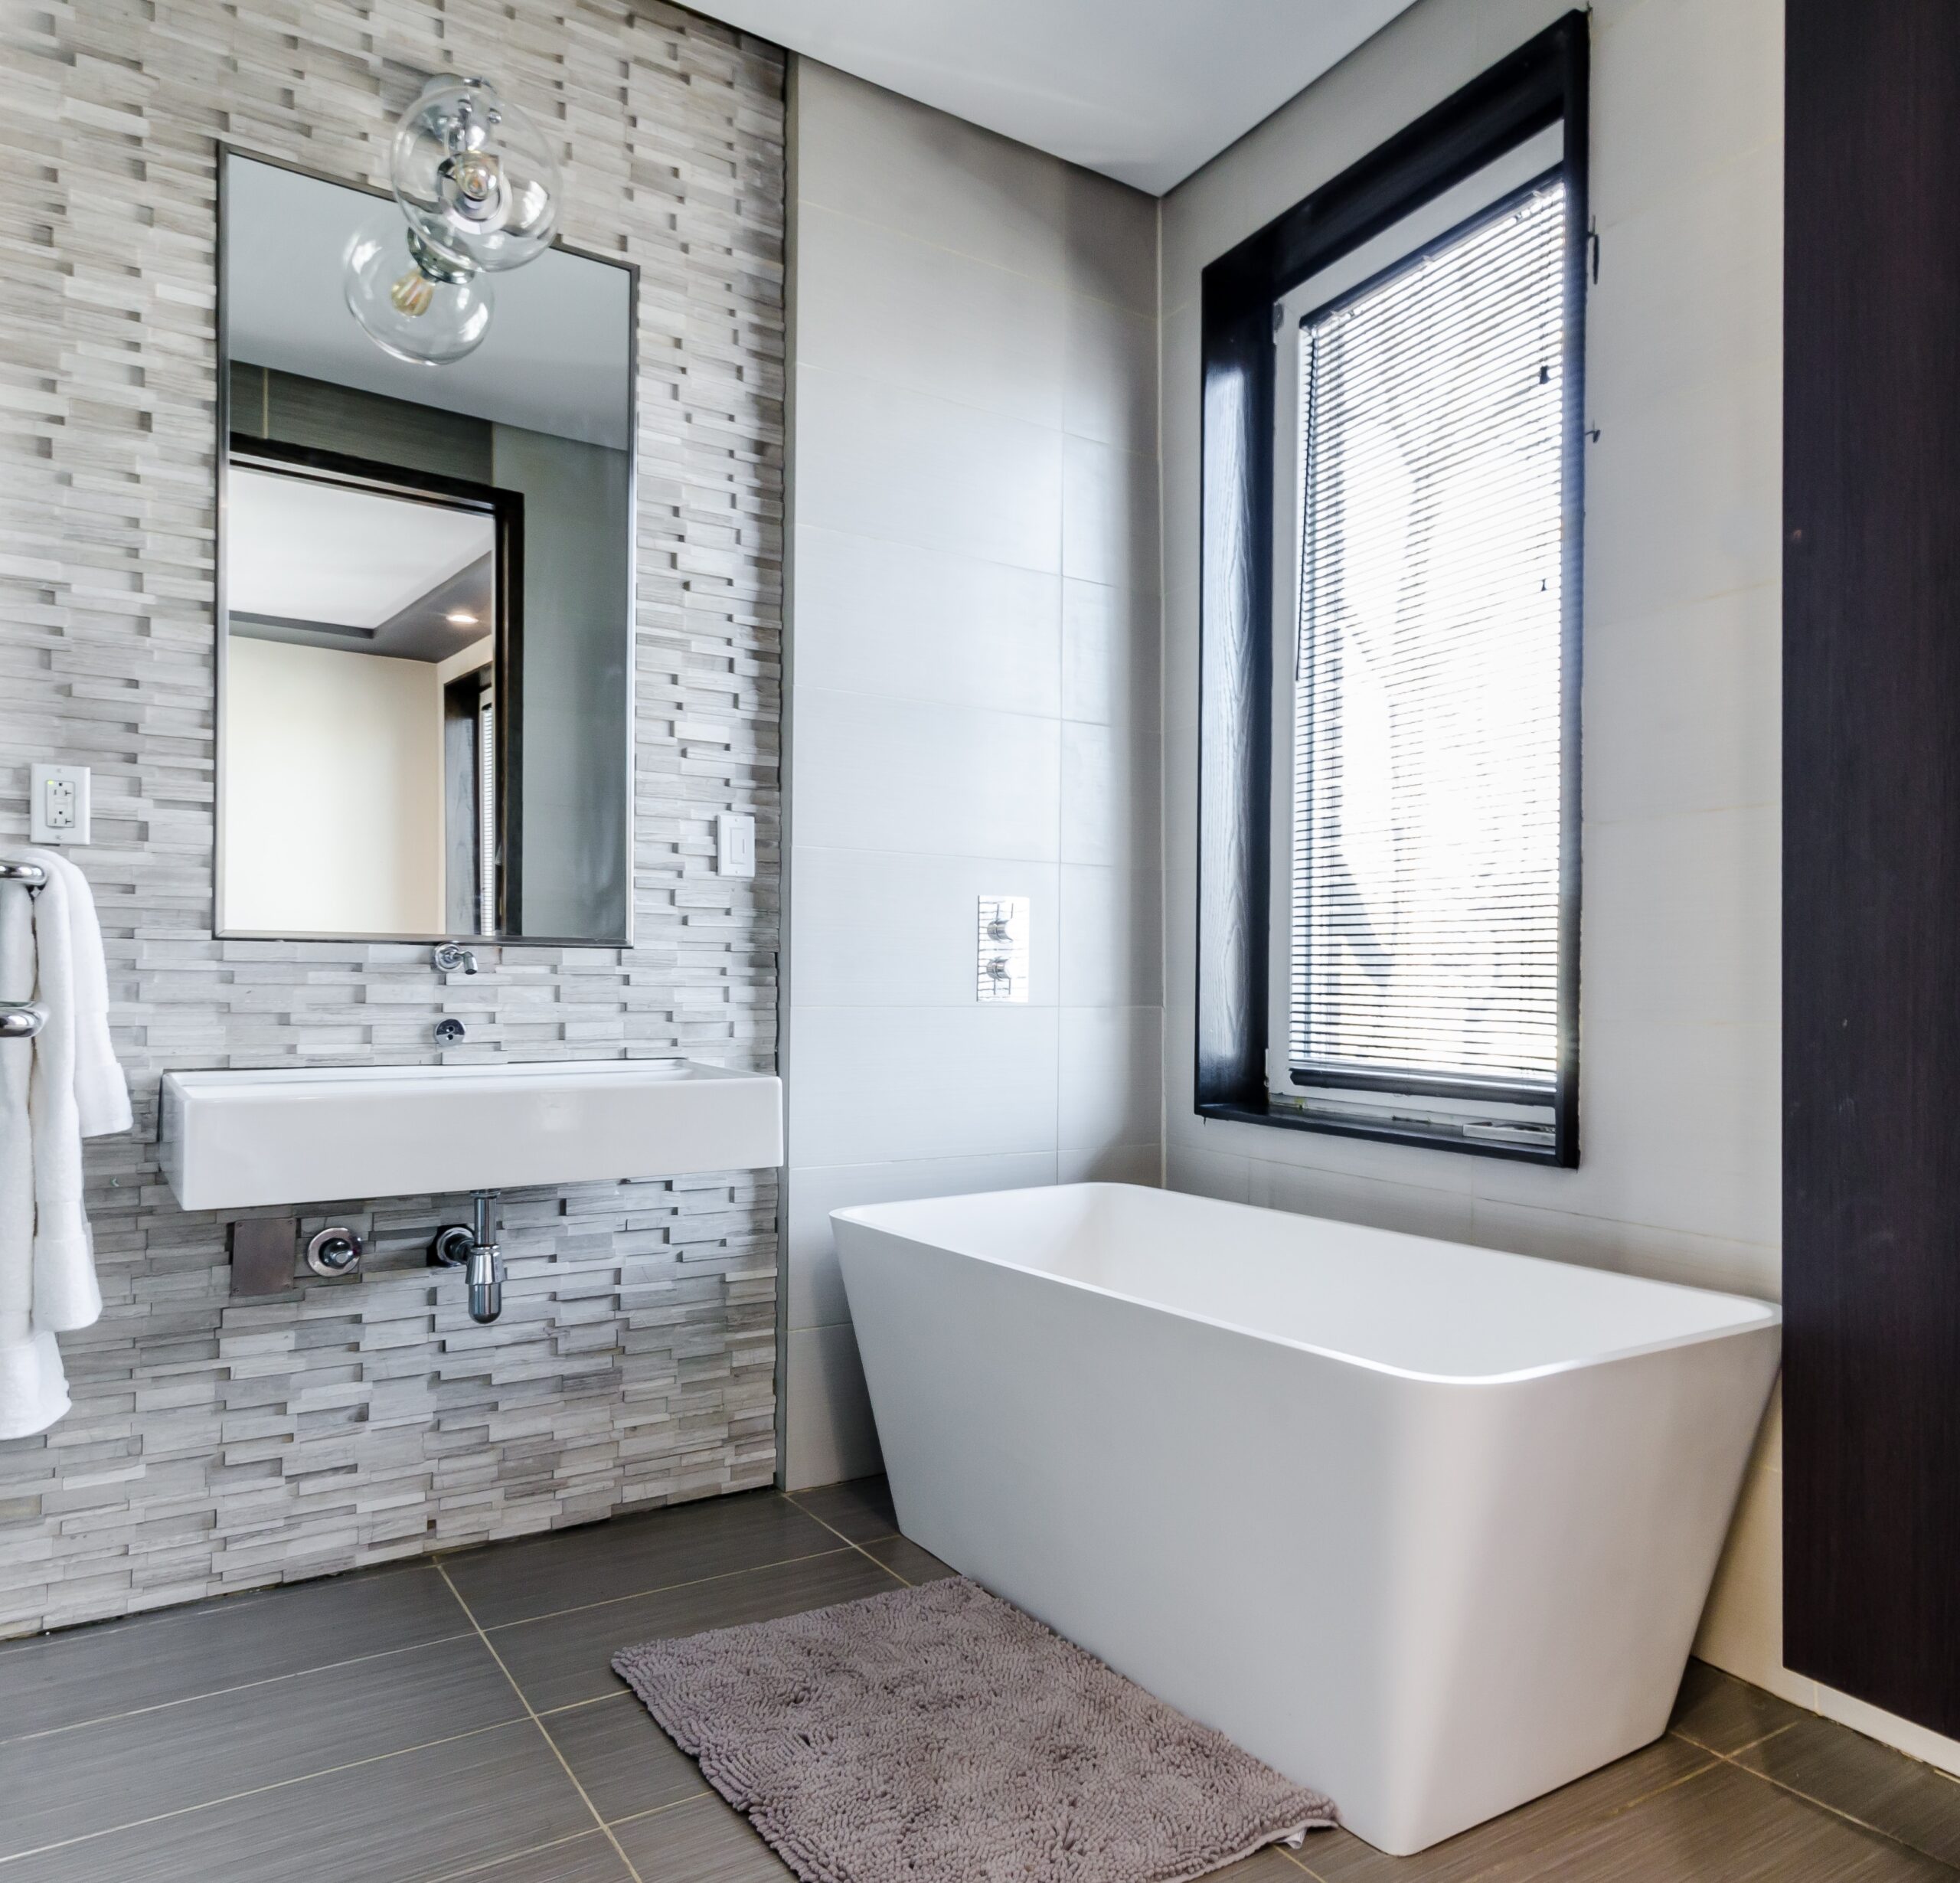 How to Remodel a Bathroom with a Window within the Shower